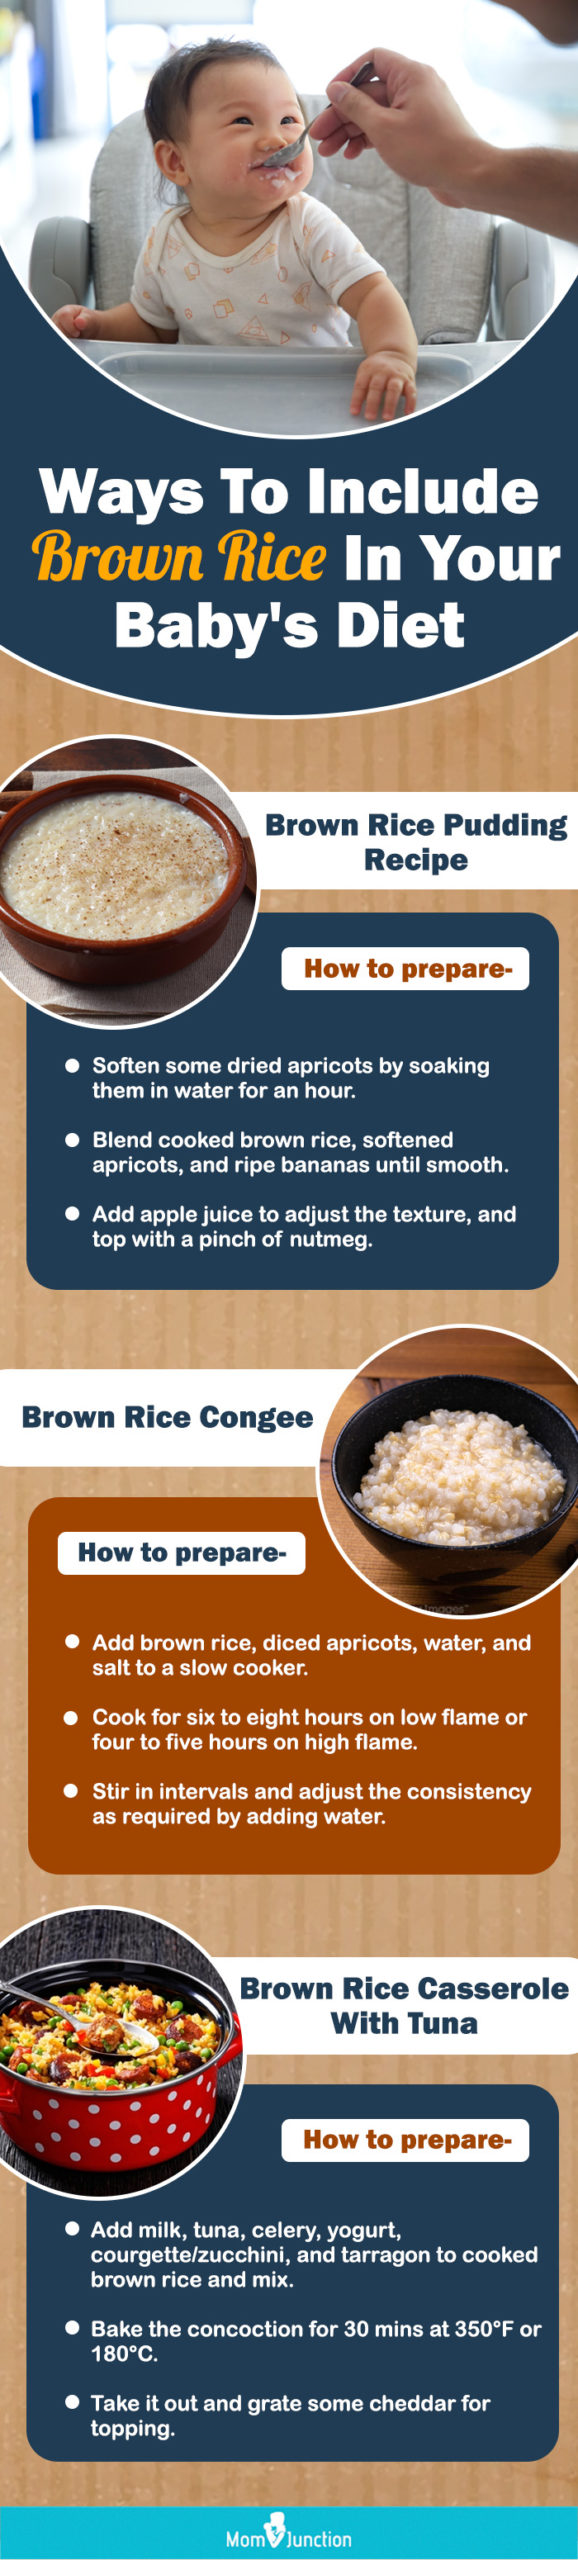 ways to include brown rice in your baby diet (infographic)